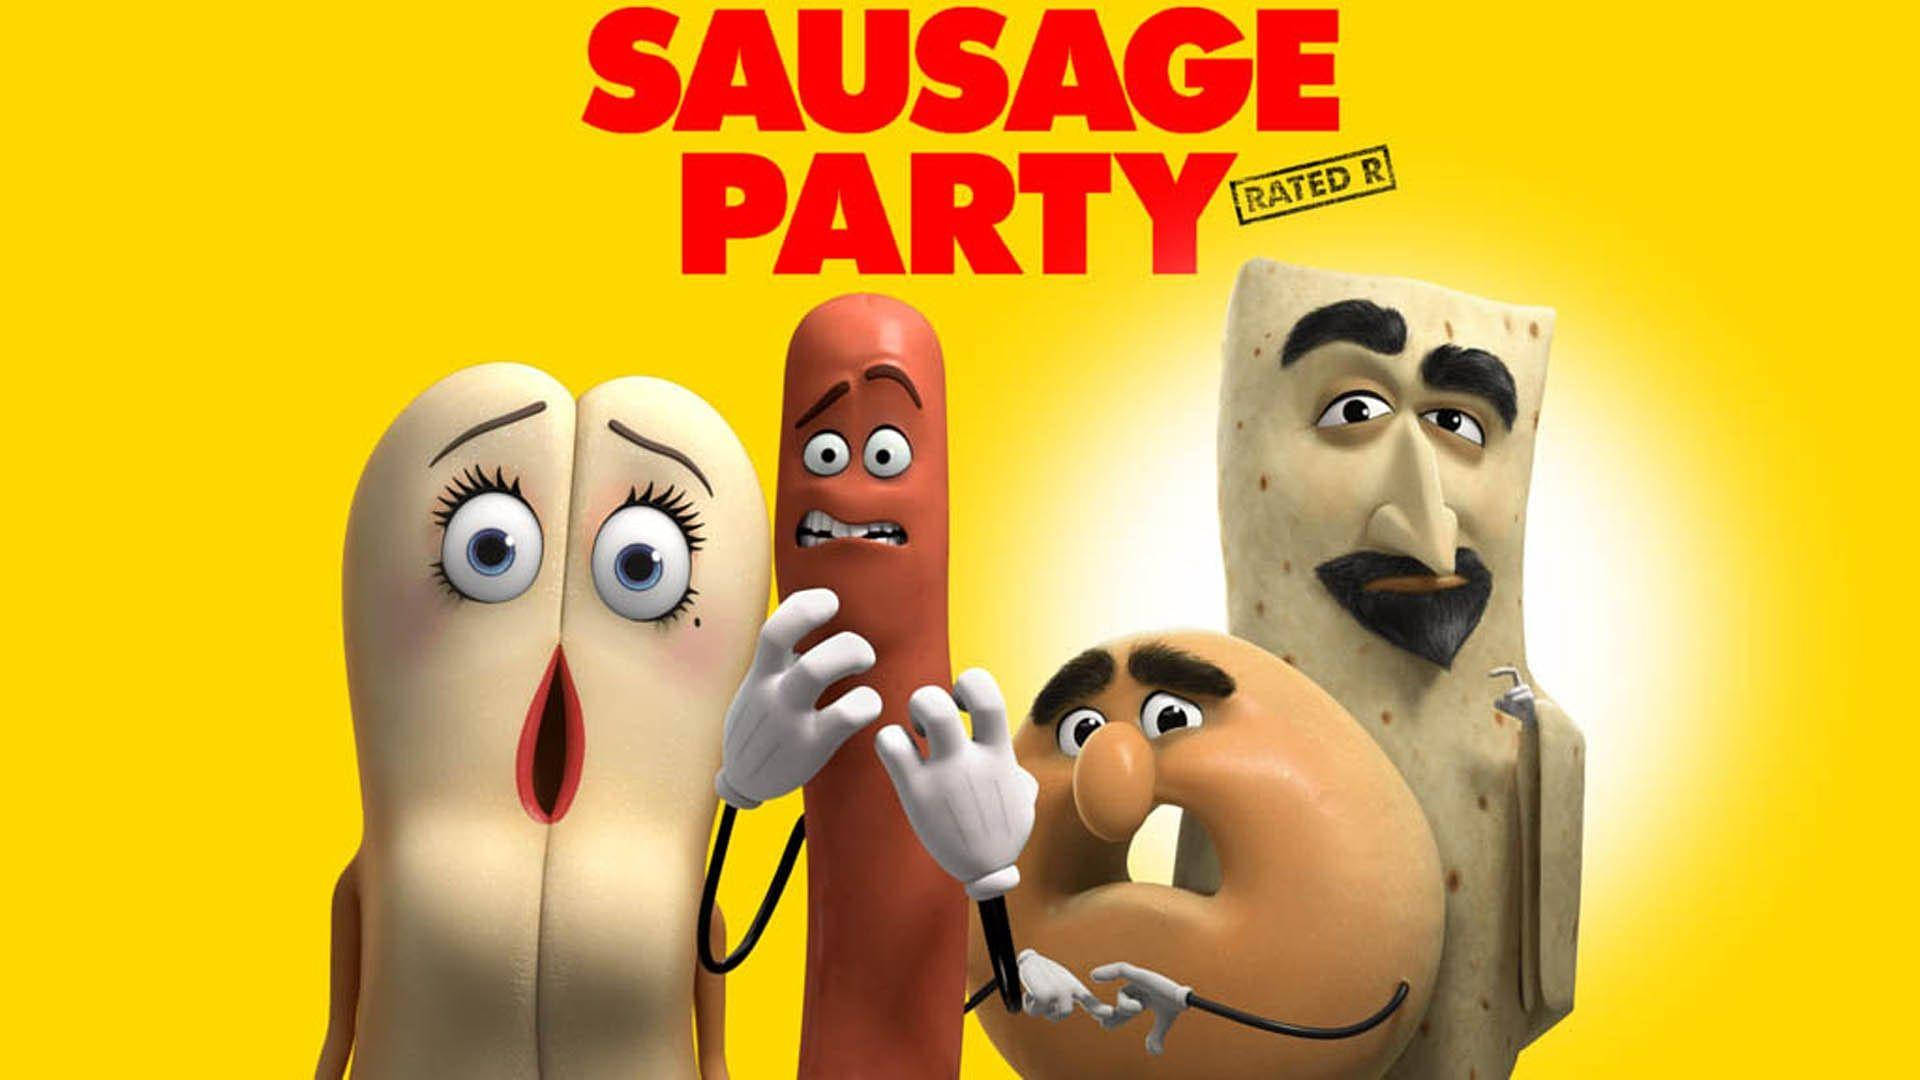 Sausage Party Movie Poster Wallpaper